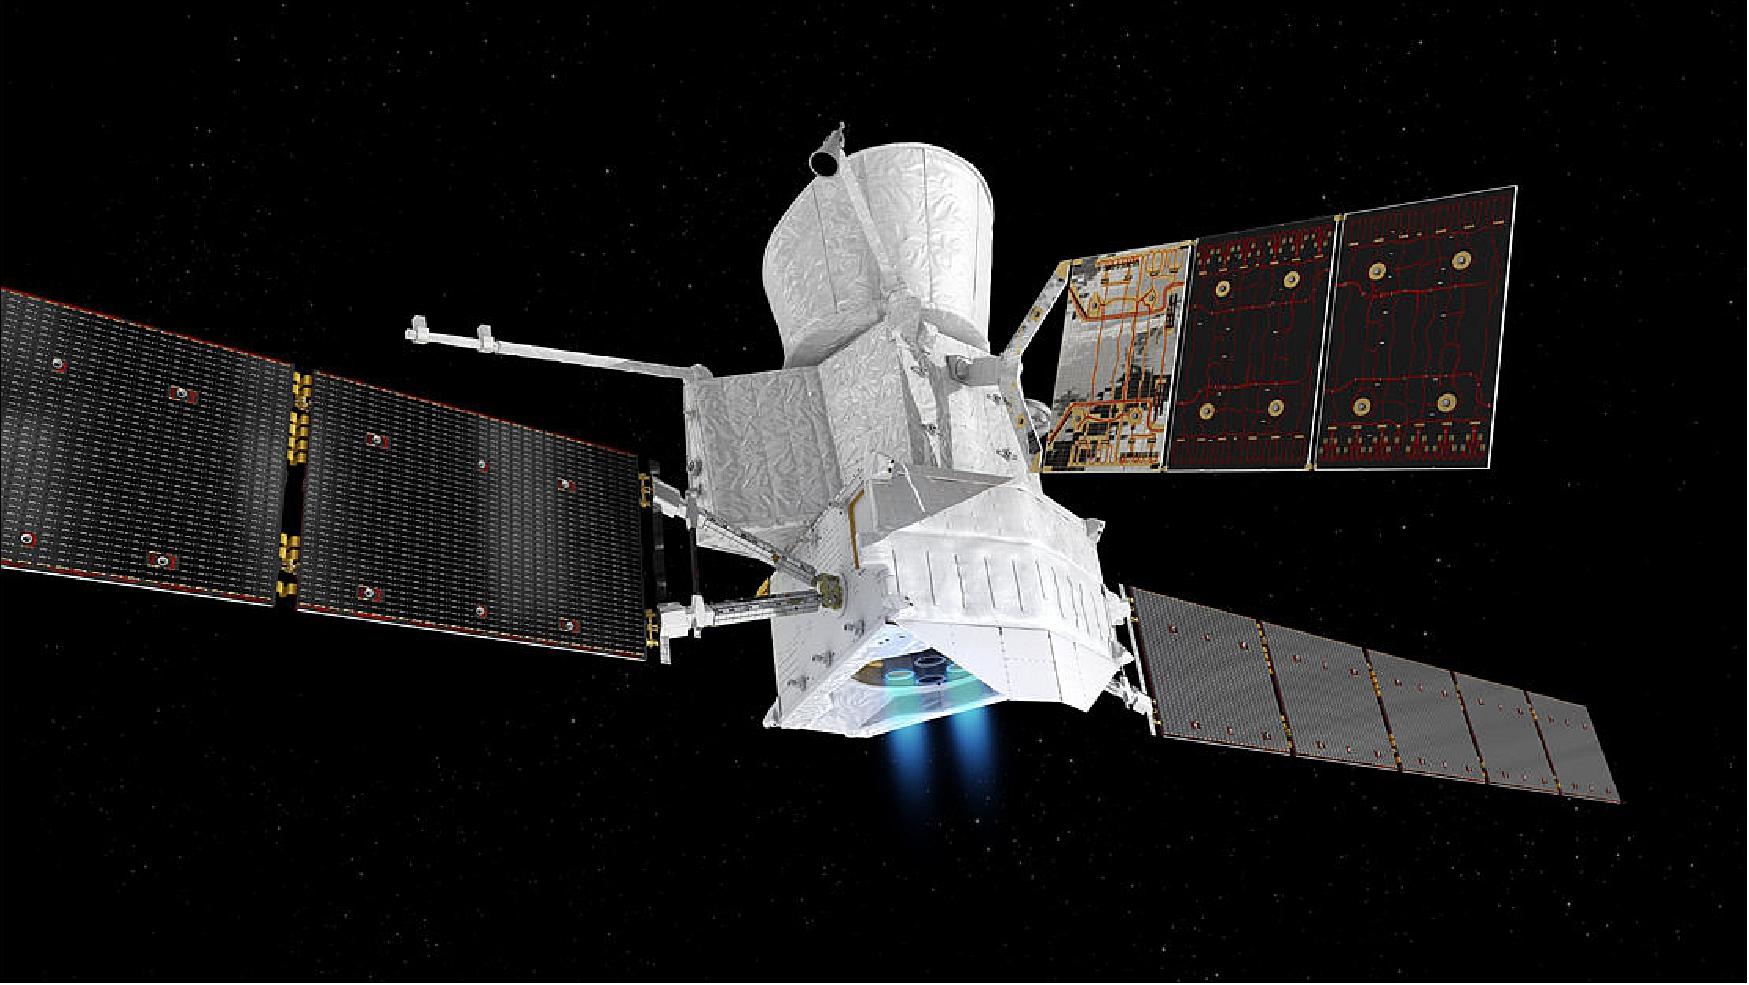 Figure 48: Artist’s impression of the BepiColombo spacecraft in cruise configuration. In this viewing orientation, the Mercury Transfer Module is at the bottom, its ion thrusters firing, and its solar wings extending about 14 m either side of the module. The 7.5 m-long solar array of the Mercury Planetary Orbiter in the middle is seen extending to the top, the reverse side facing the viewer. The booms of the magnetometer and medium gain antenna are also seen. The Mercury Magnetospheric Orbiter sits inside the sunshield, which is visible at the top (image credit: ESA/ATG medialab)